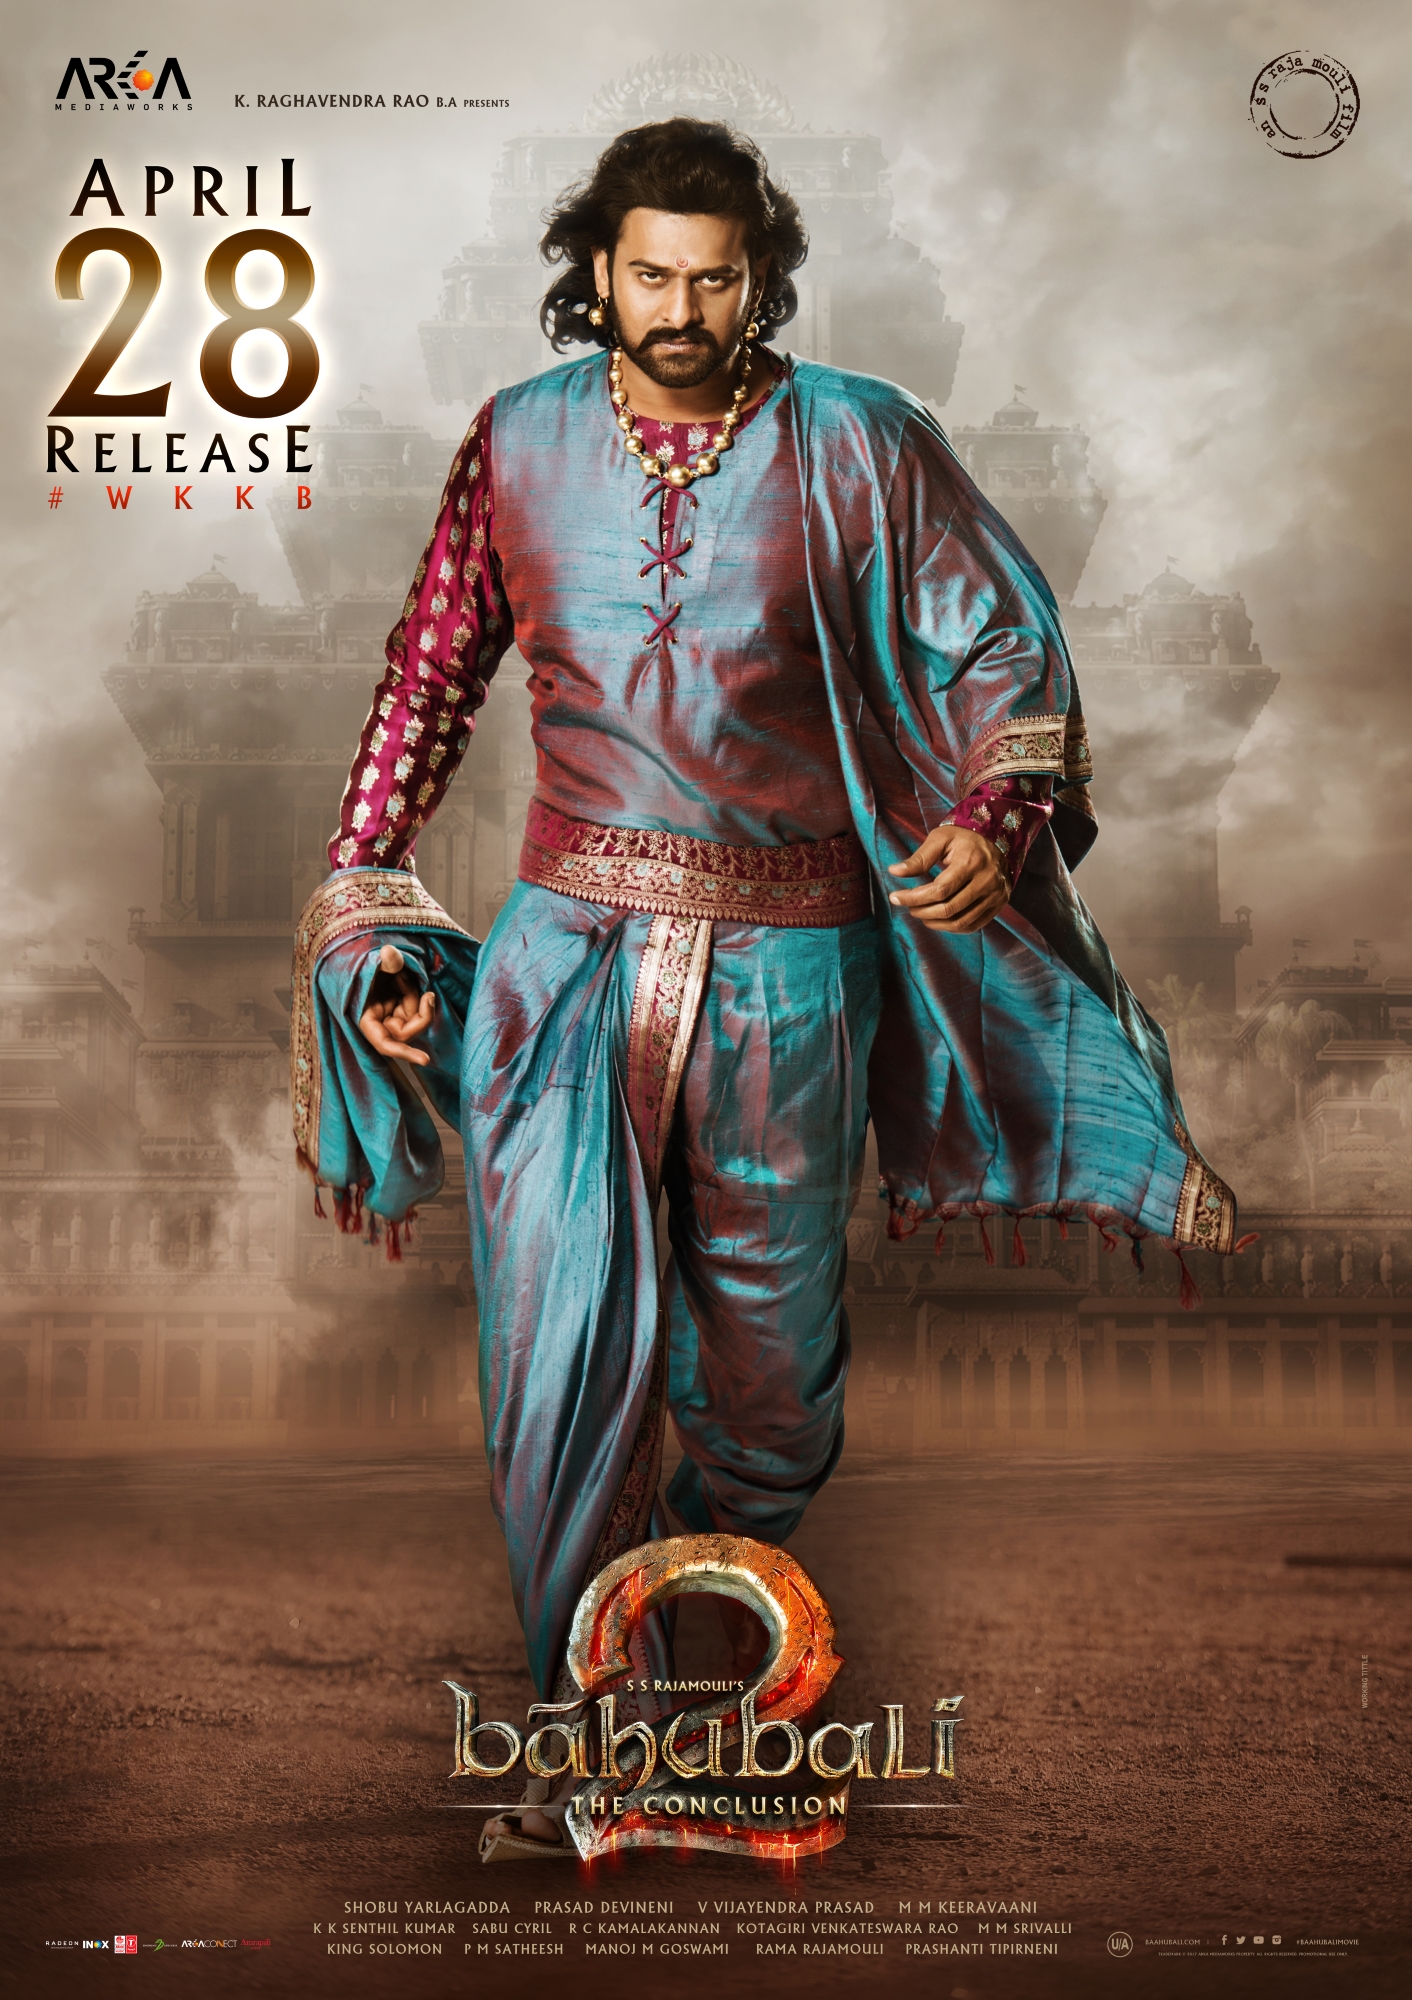 Check Out These New Posters For Baahubali 2 The Conclusion Indias